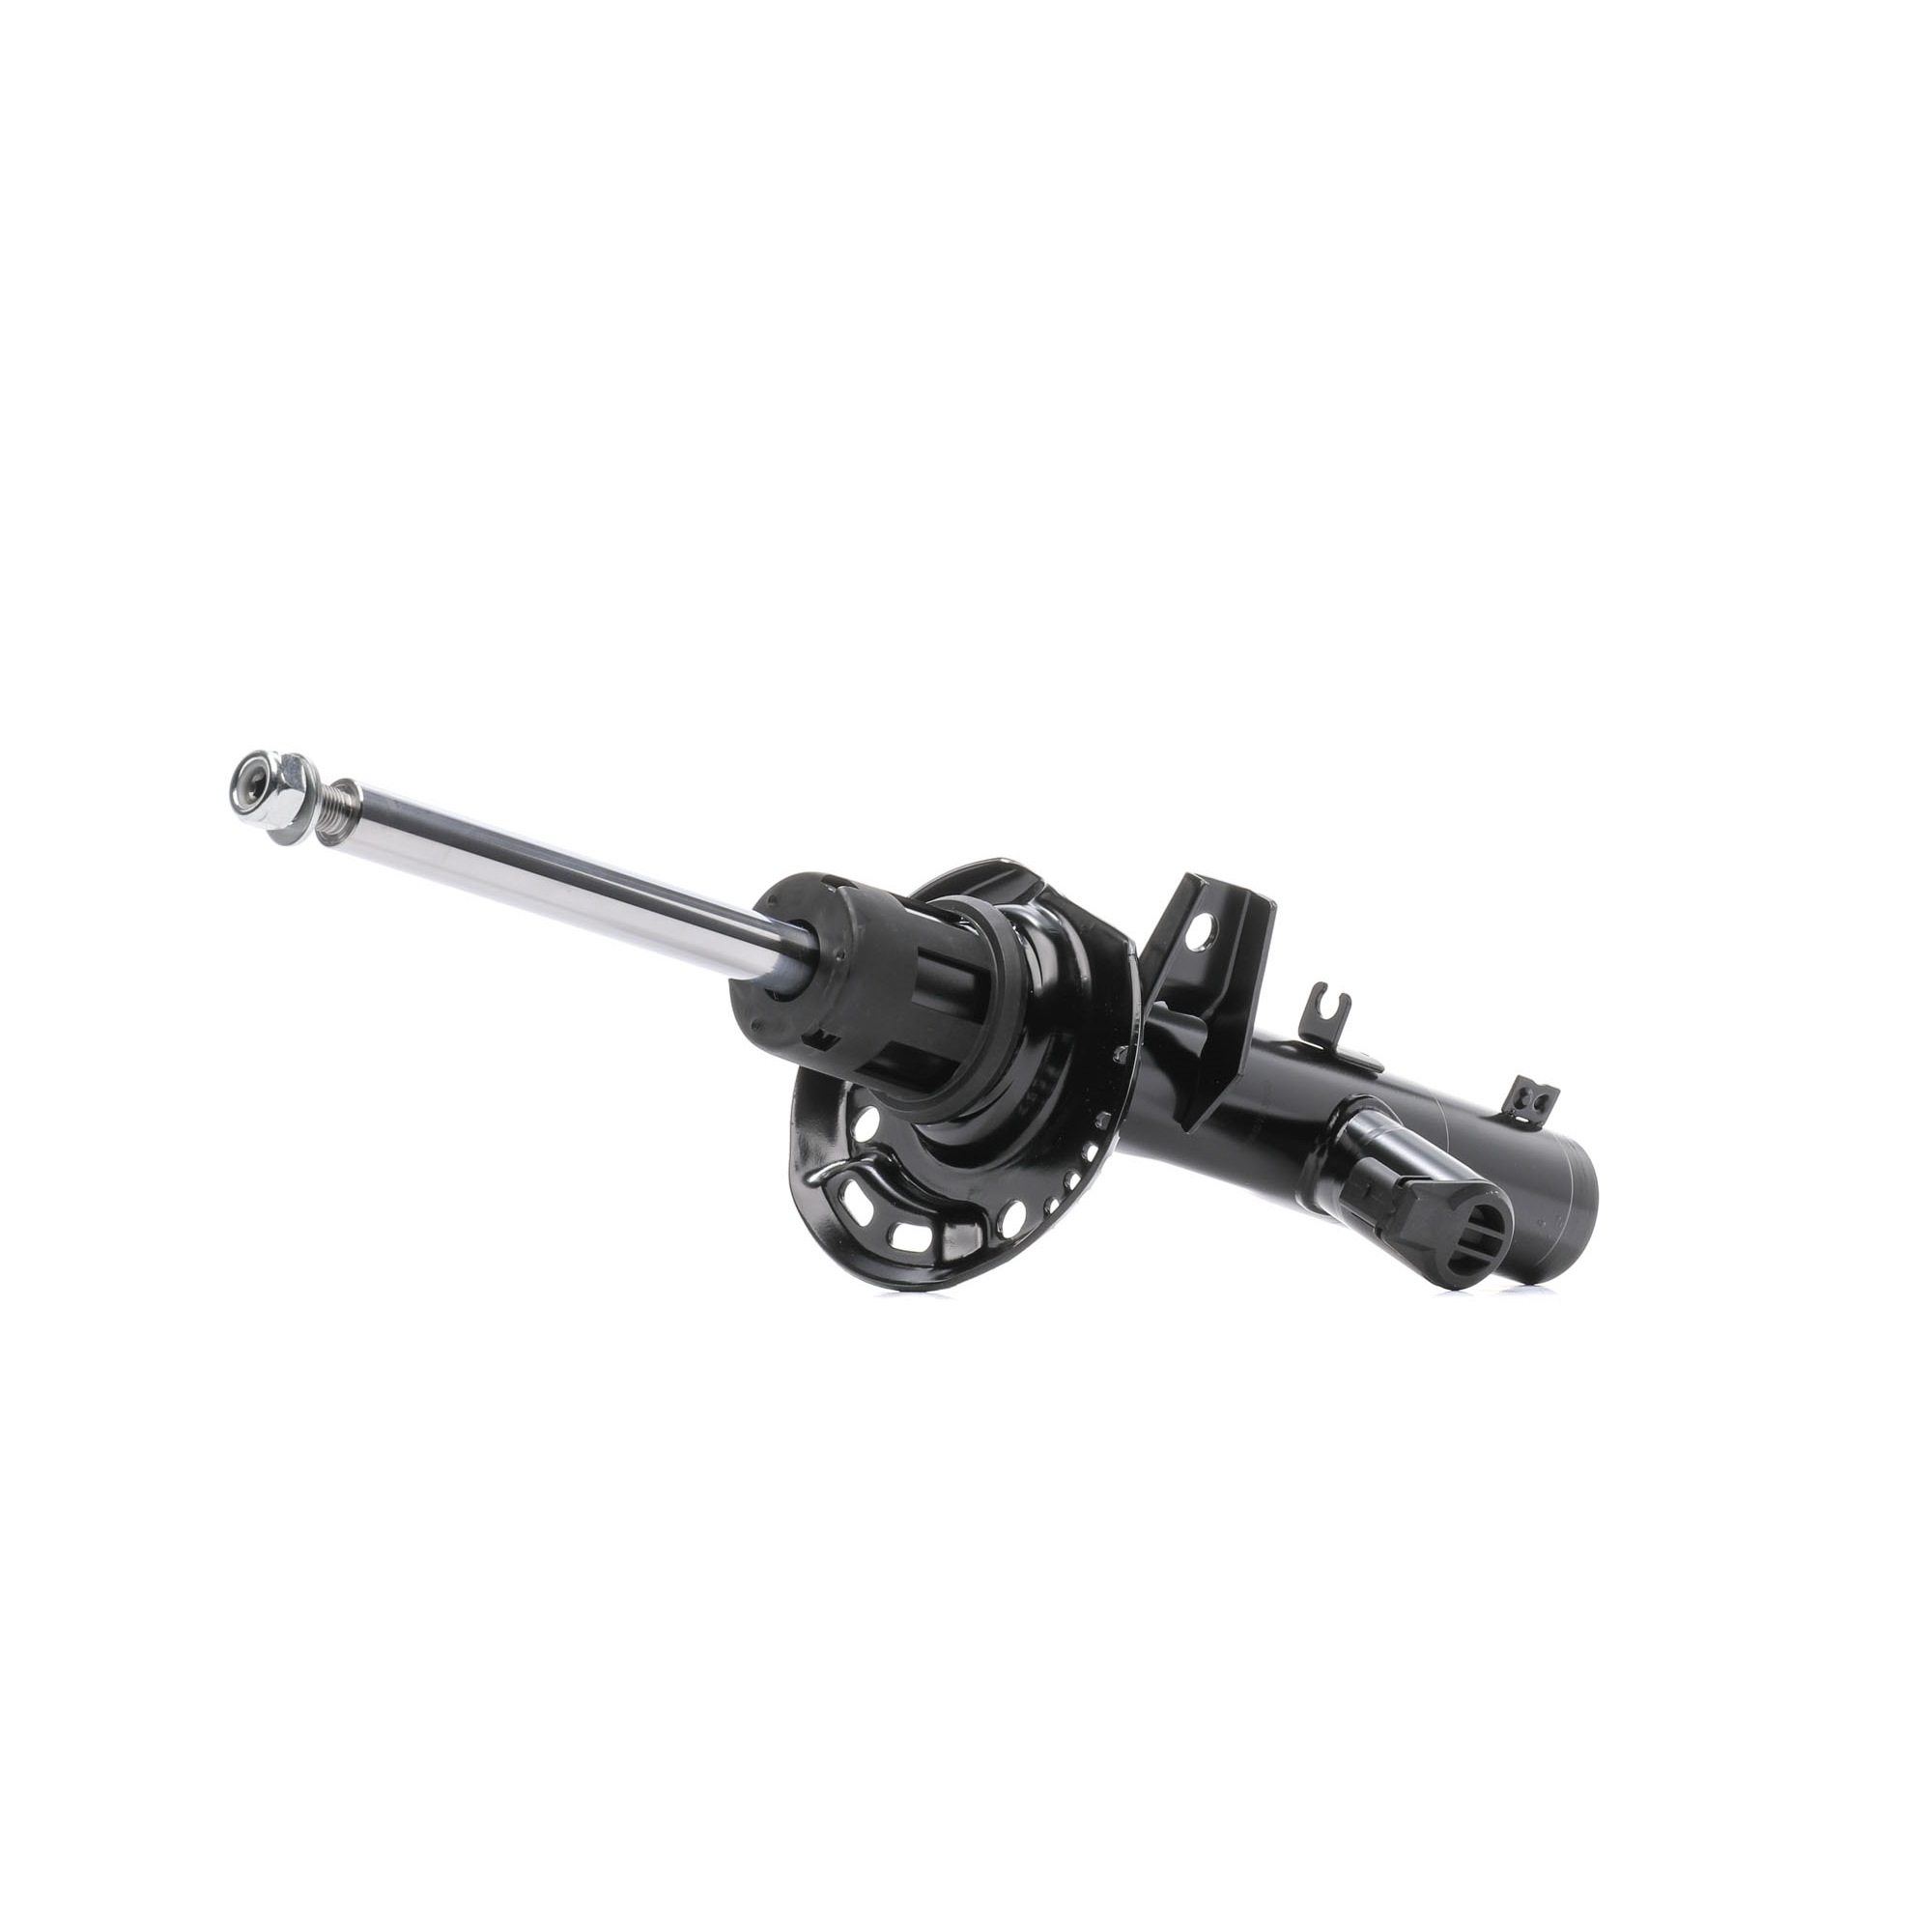 RIDEX Gas Pressure, Electronically adjustable shock strength, Suspension Strut, Top pin, Bottom Clamp Shocks 854S1319 buy